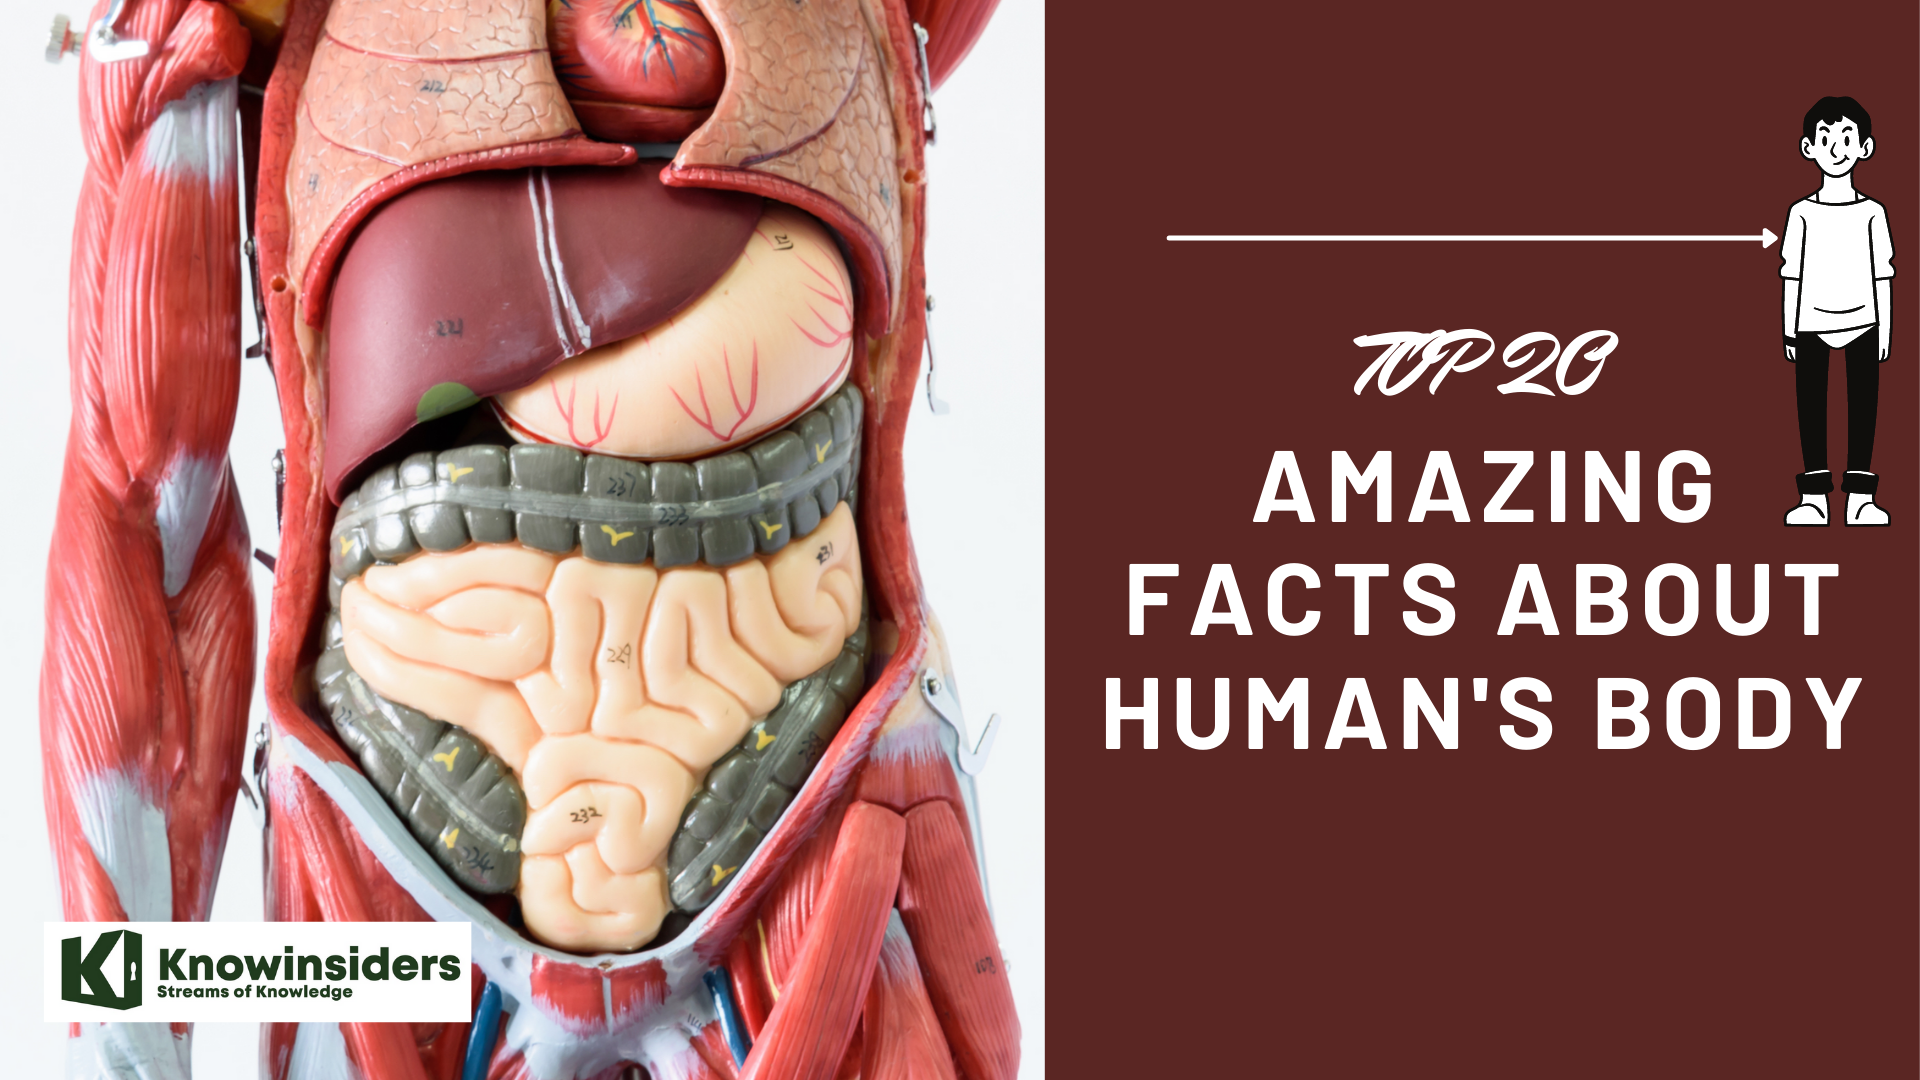 Top 20 amazing facts about human's body 